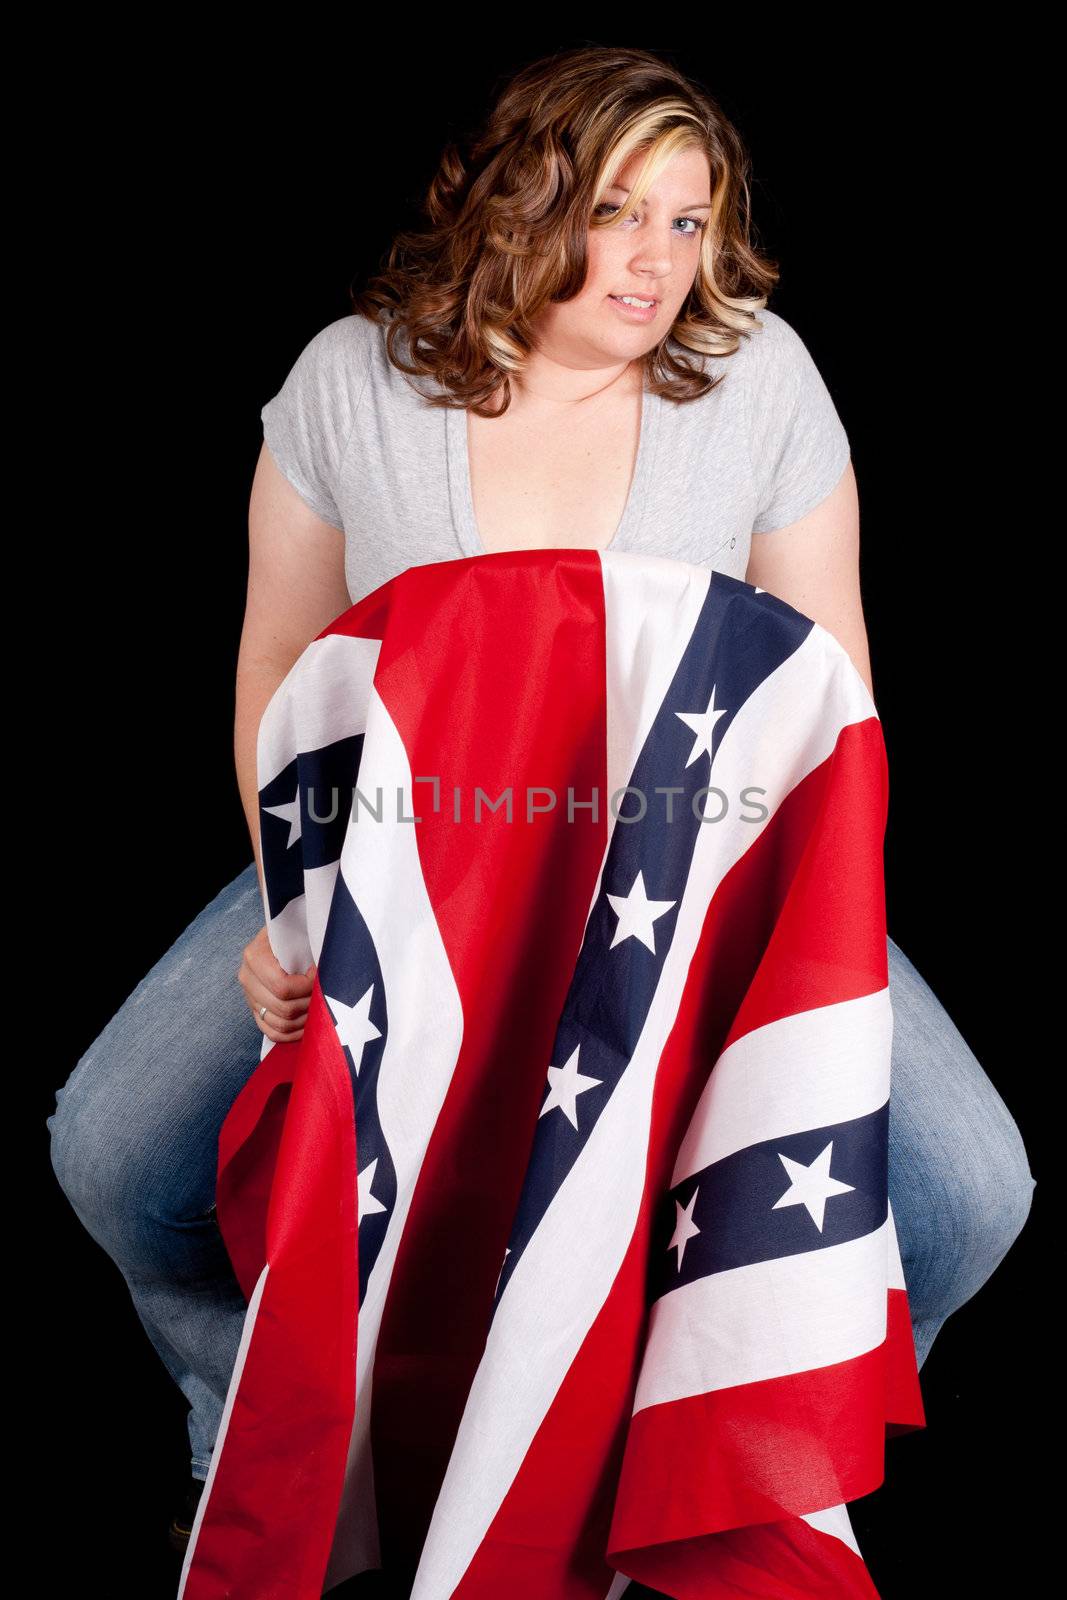 A soldiers wife, alone with her patriotism.